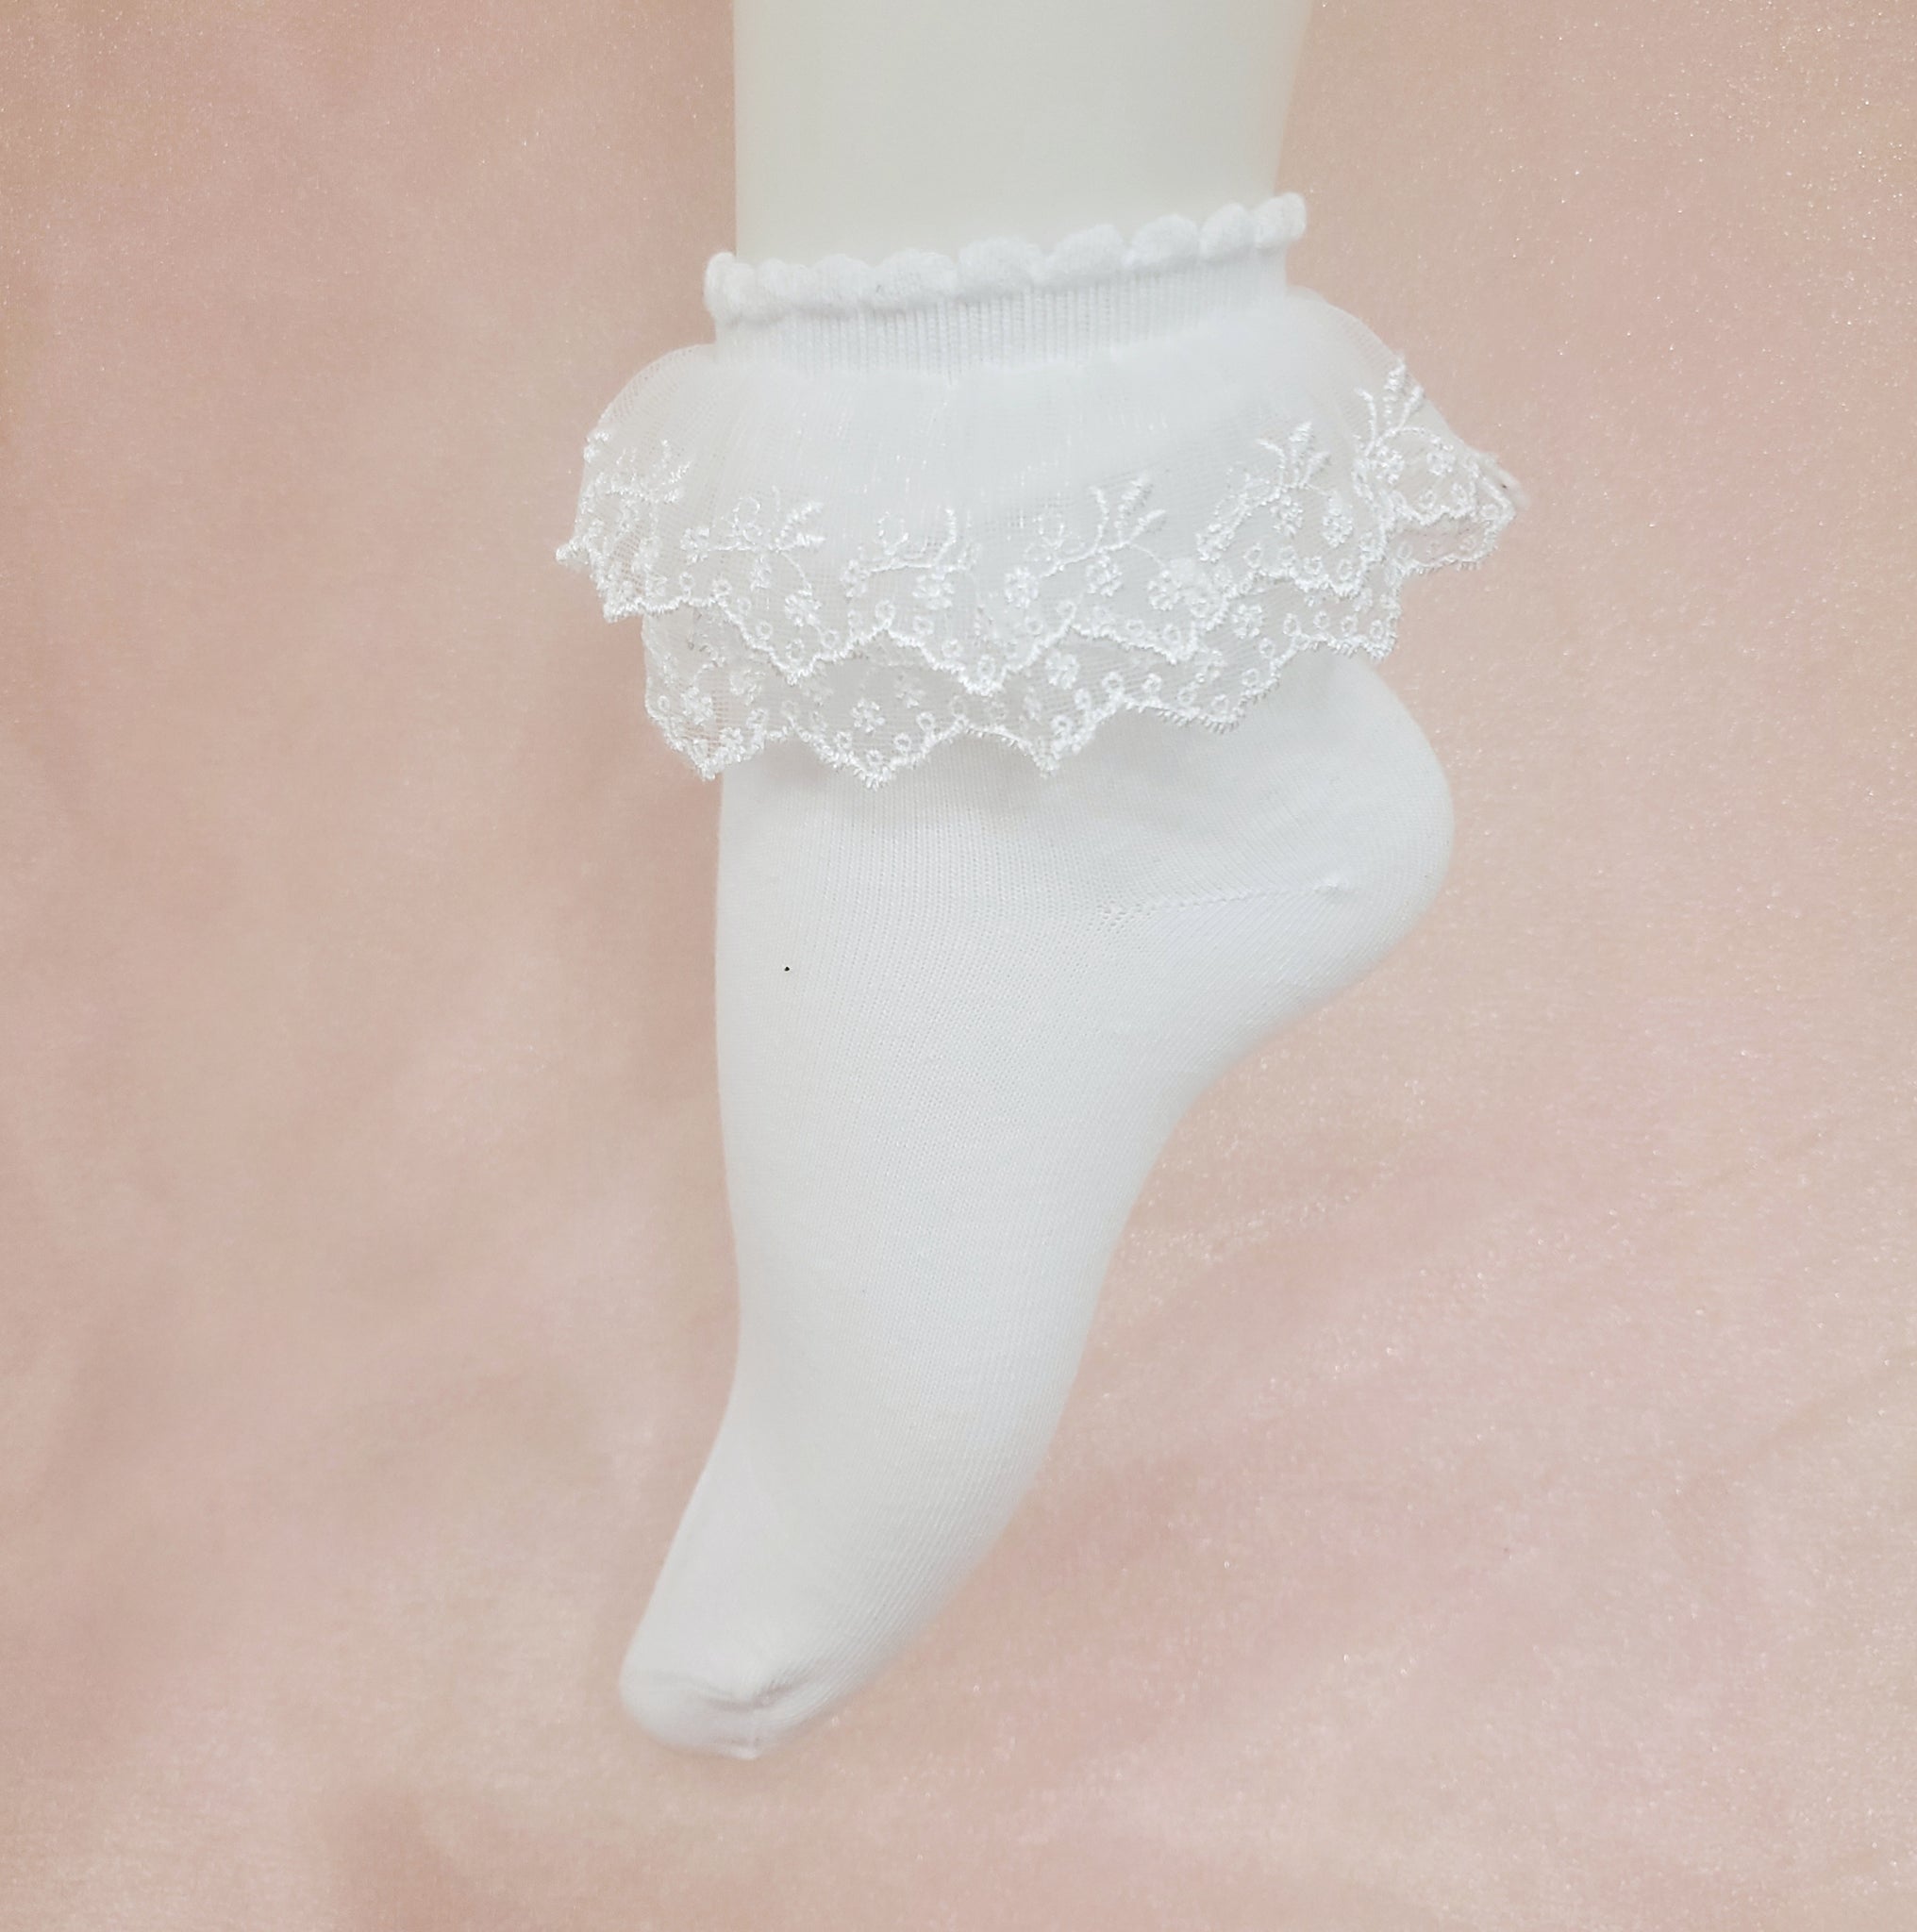 Instant Shipping! Double Lace Ankle Socks